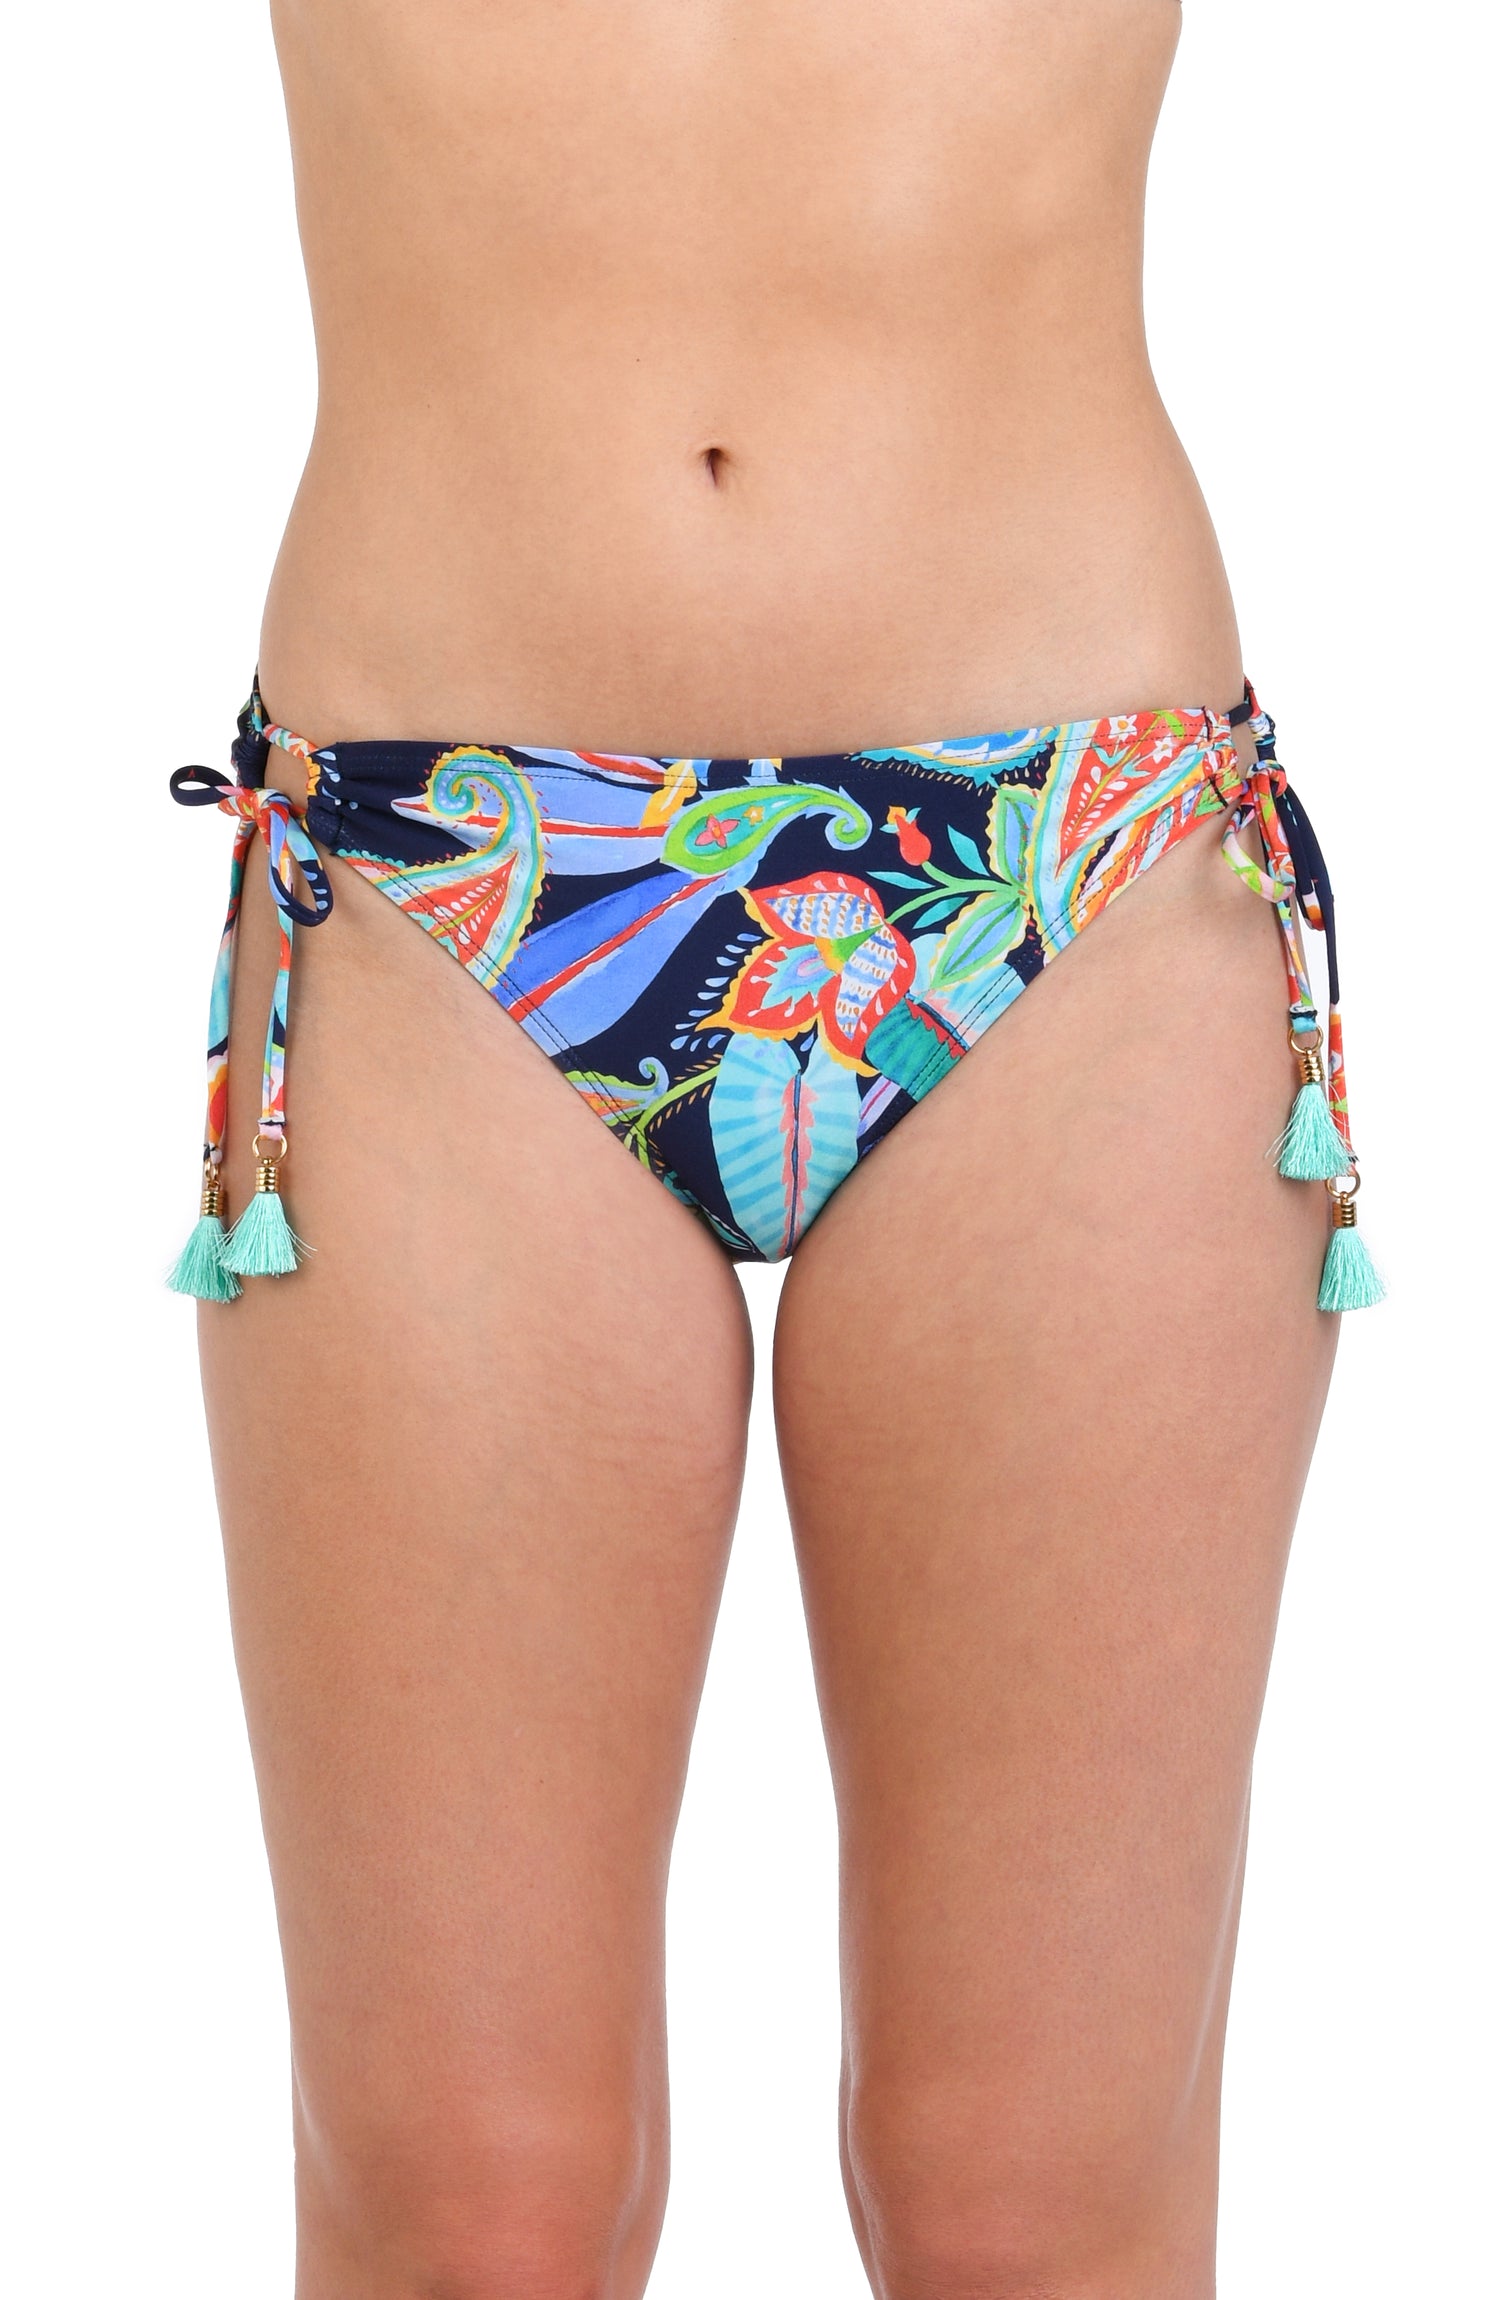 Model is wearing a pink, orange, yellow, and green multicolored tropical patterned side tie hipster bottom against an indigo blue background.